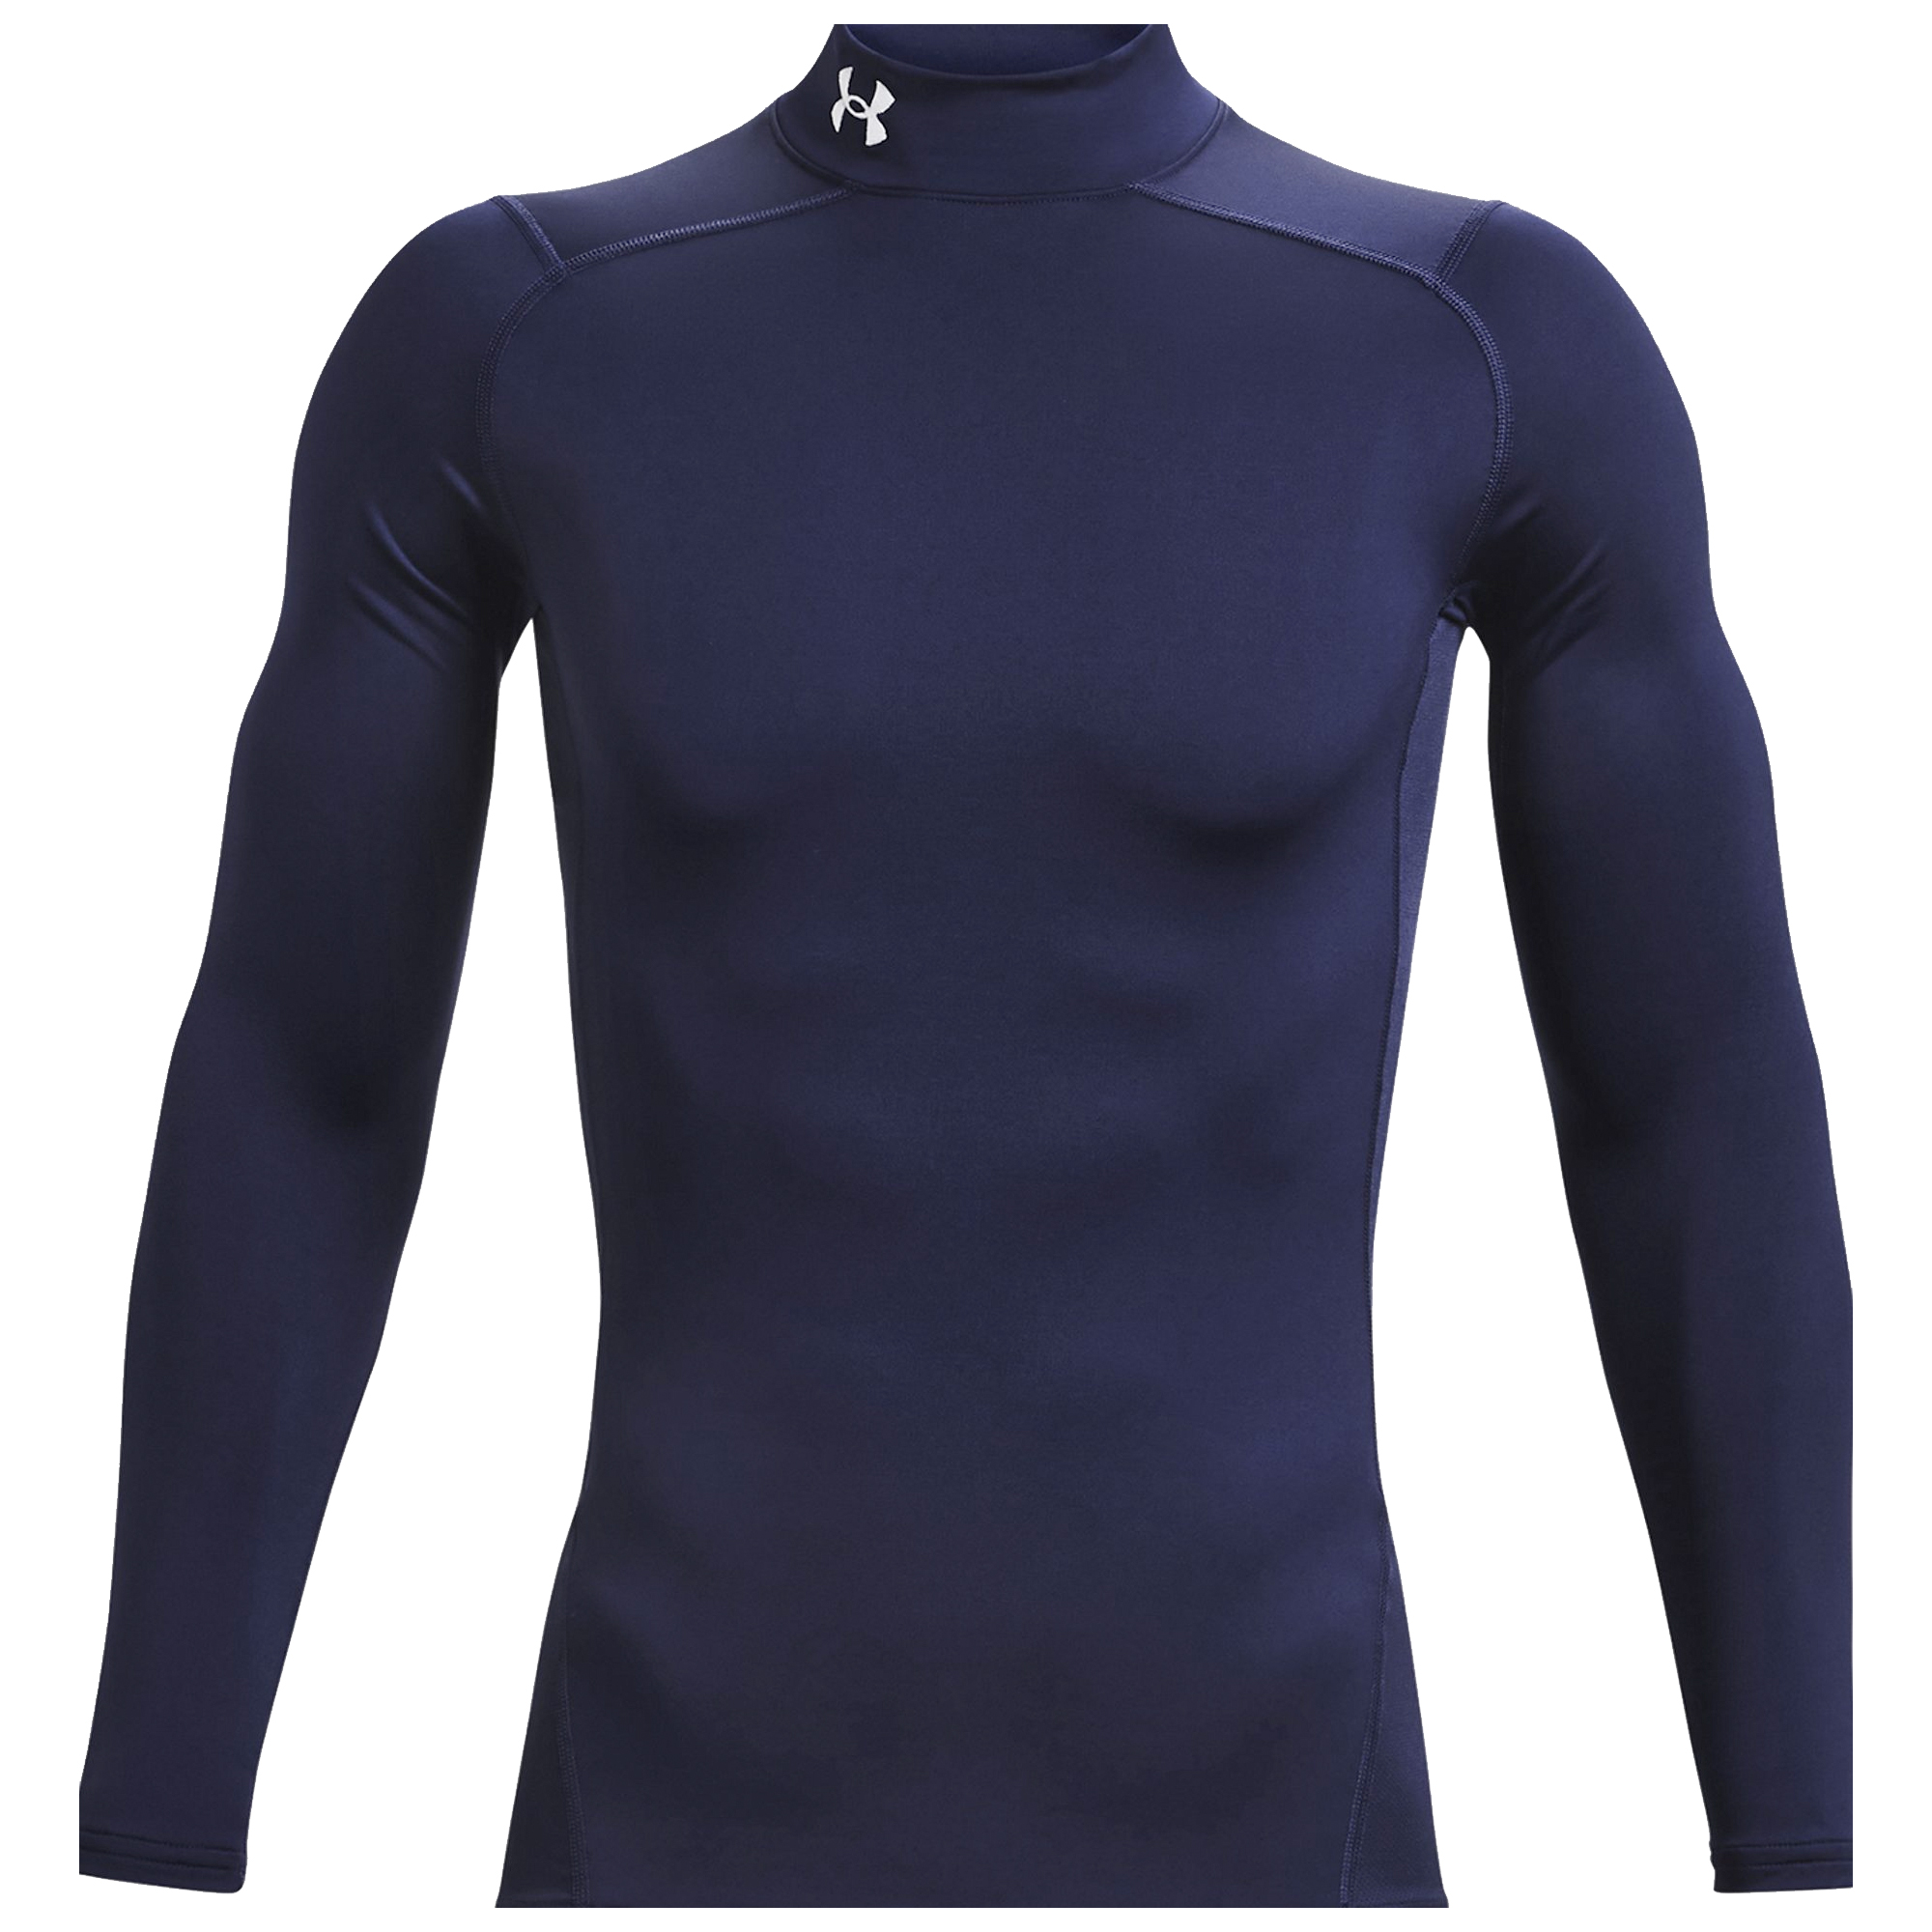 Under Armour Mens ColdGear Compression Mock Base Layer  - Midnight Navy